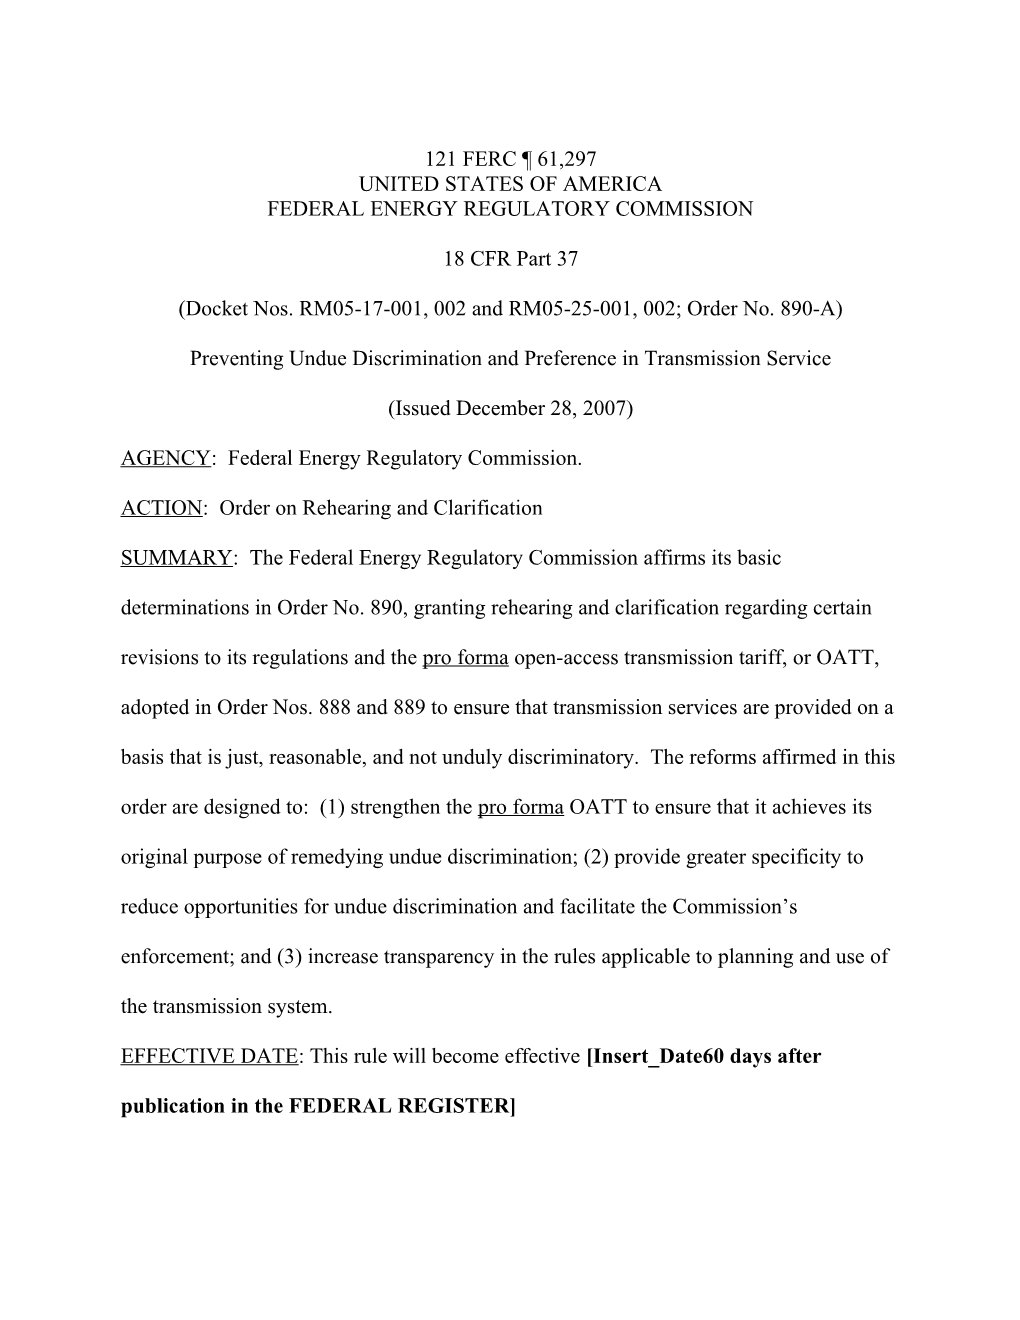 December 28, 2007 Order on Rehearing and Clarification in Docket Nos. RM05-17-001,002 And